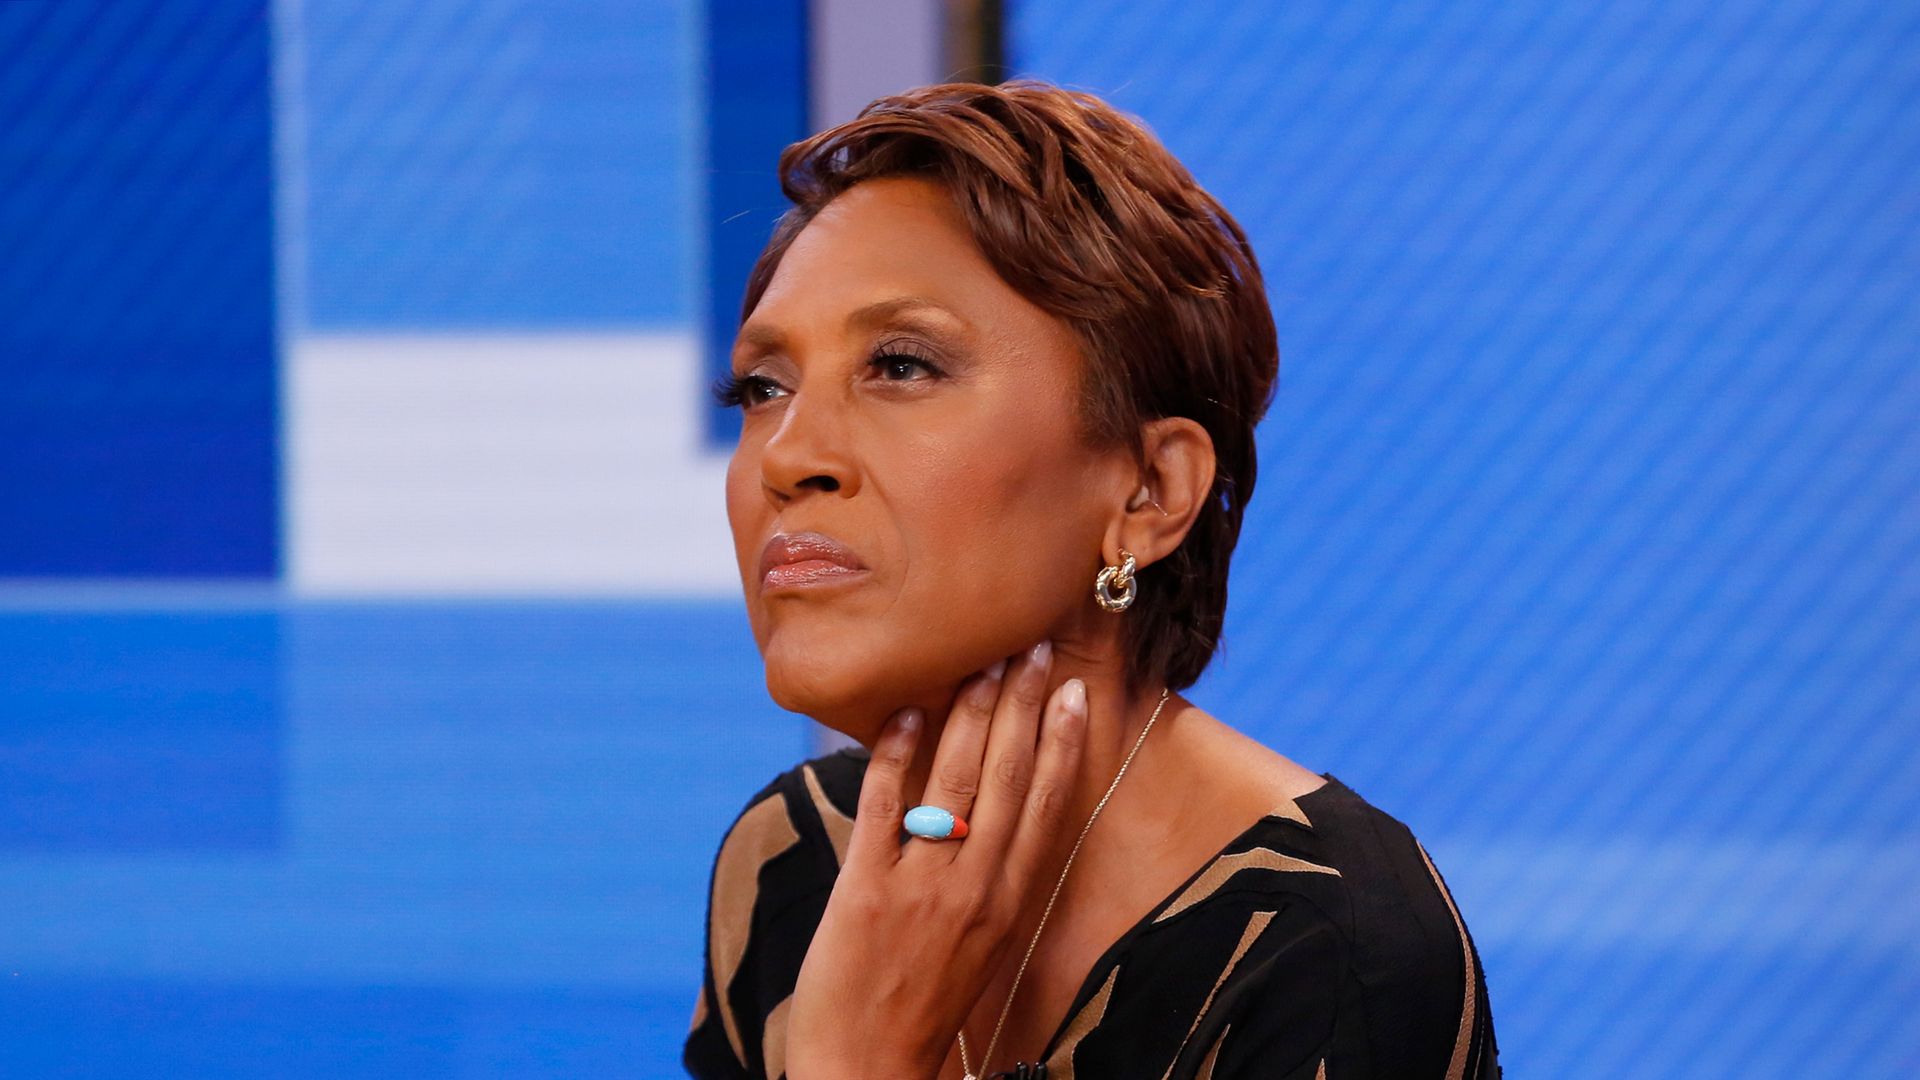 Robin Roberts reflects on time away from GMA in bittersweet post